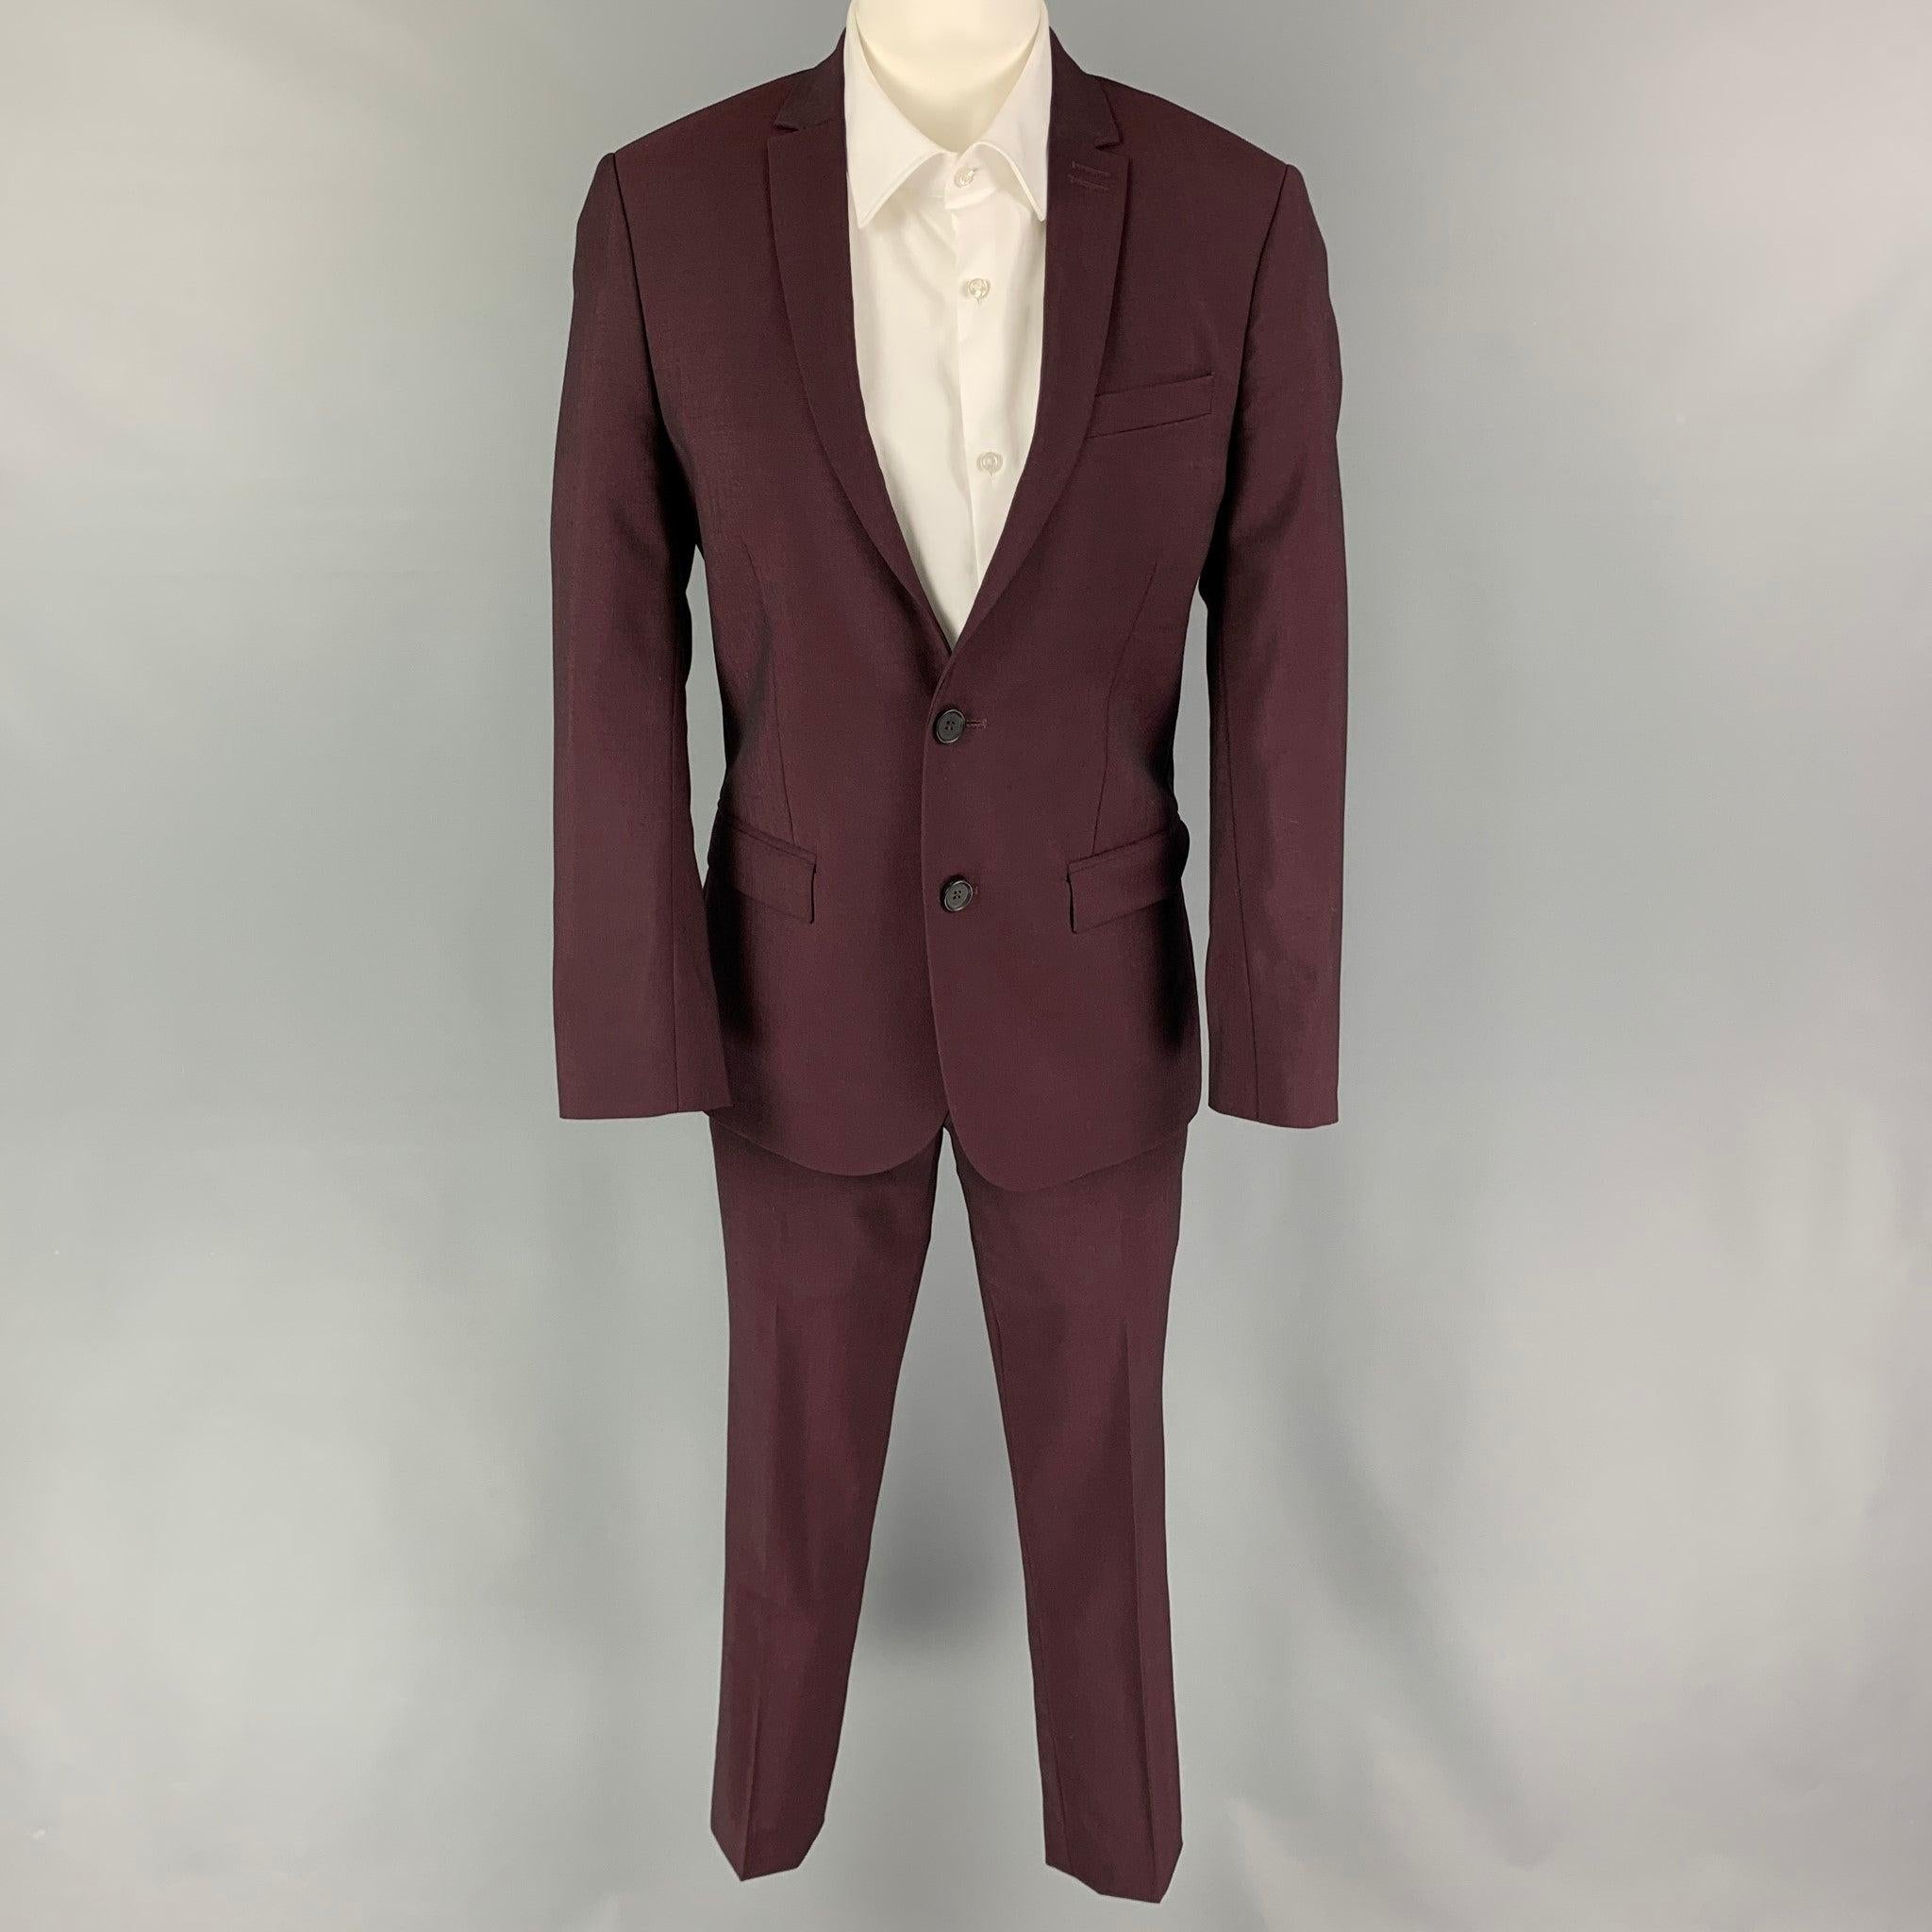 THE KOOPLES
suit comes in a burgundy wool / mohair with a full liner and includes a single breasted, double button sport coat with a notch lapel and matching flat front trousers. Excellent Pre-Owned Condition. 

Marked:   44 

Measurements: 
 